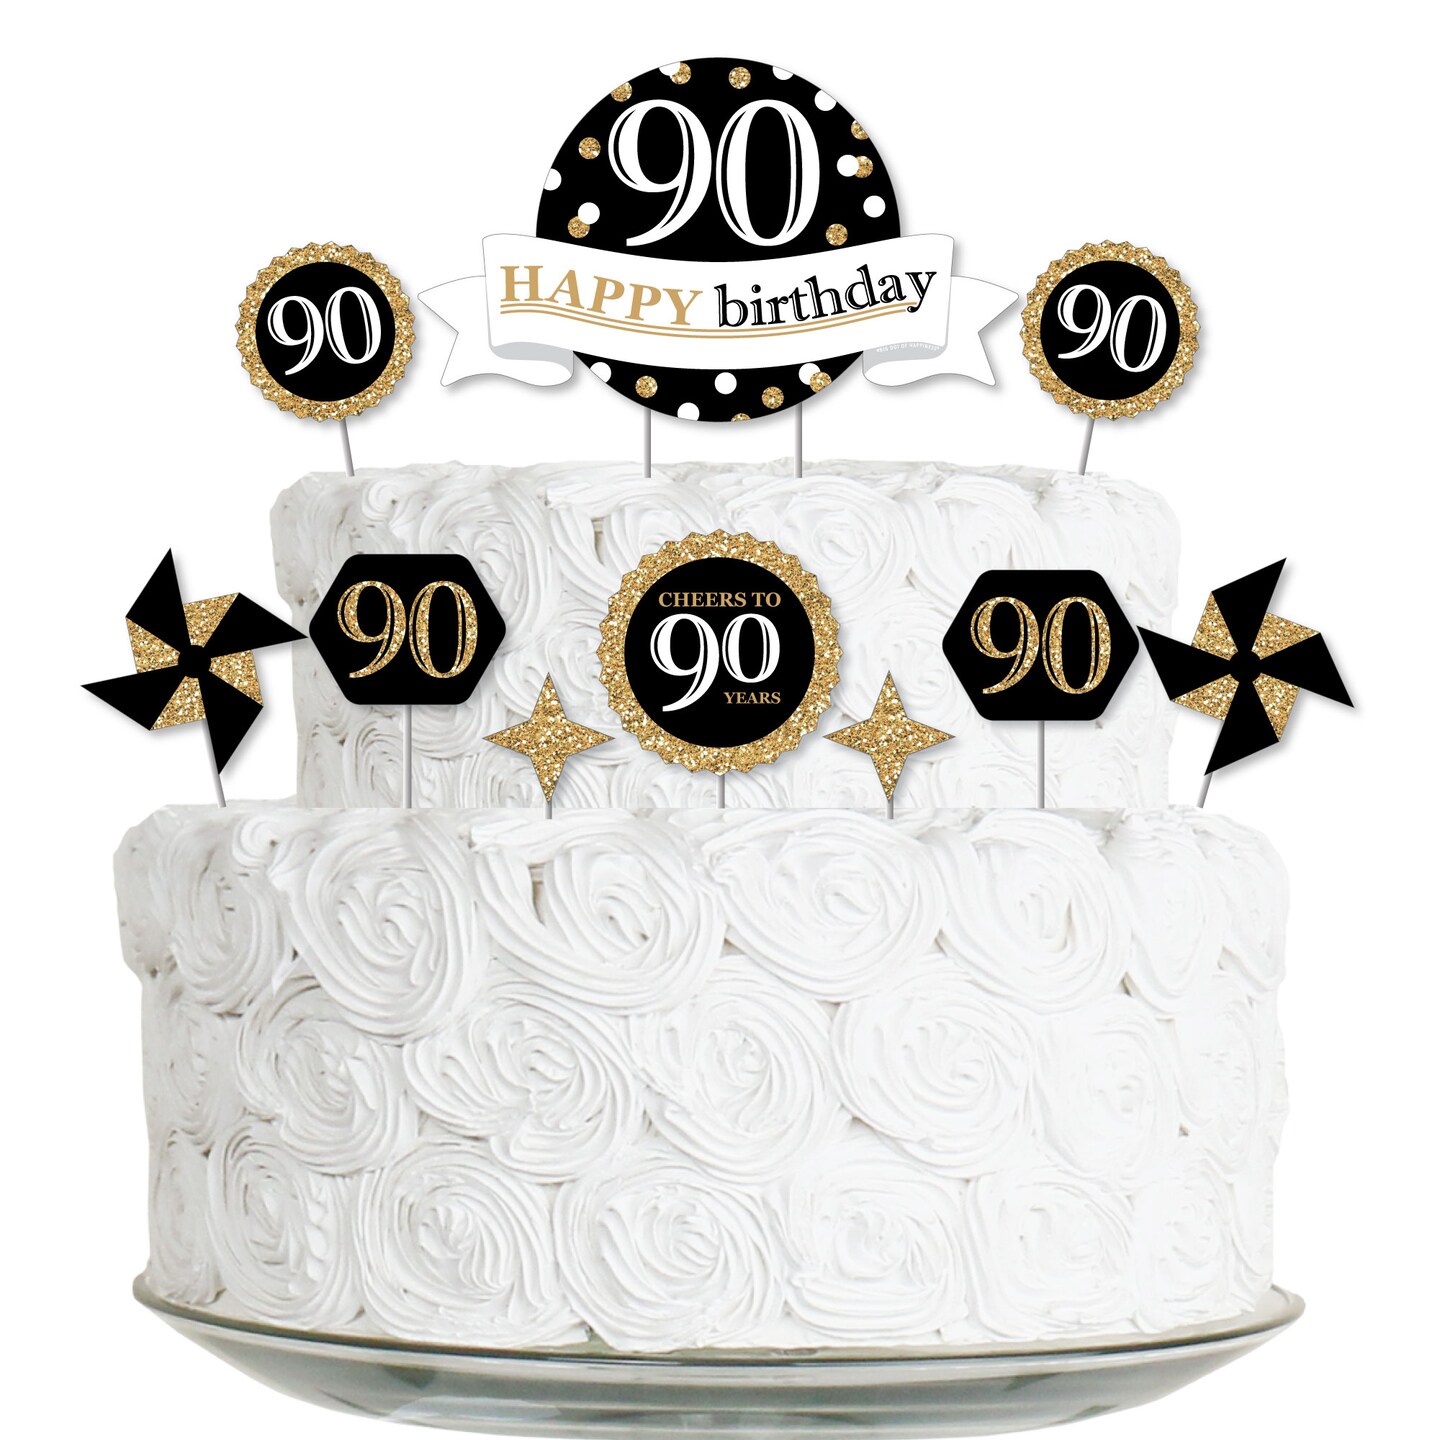 Rose Gold Mirror 'ninety' Birthday Cake Topper - Online Party Supplies